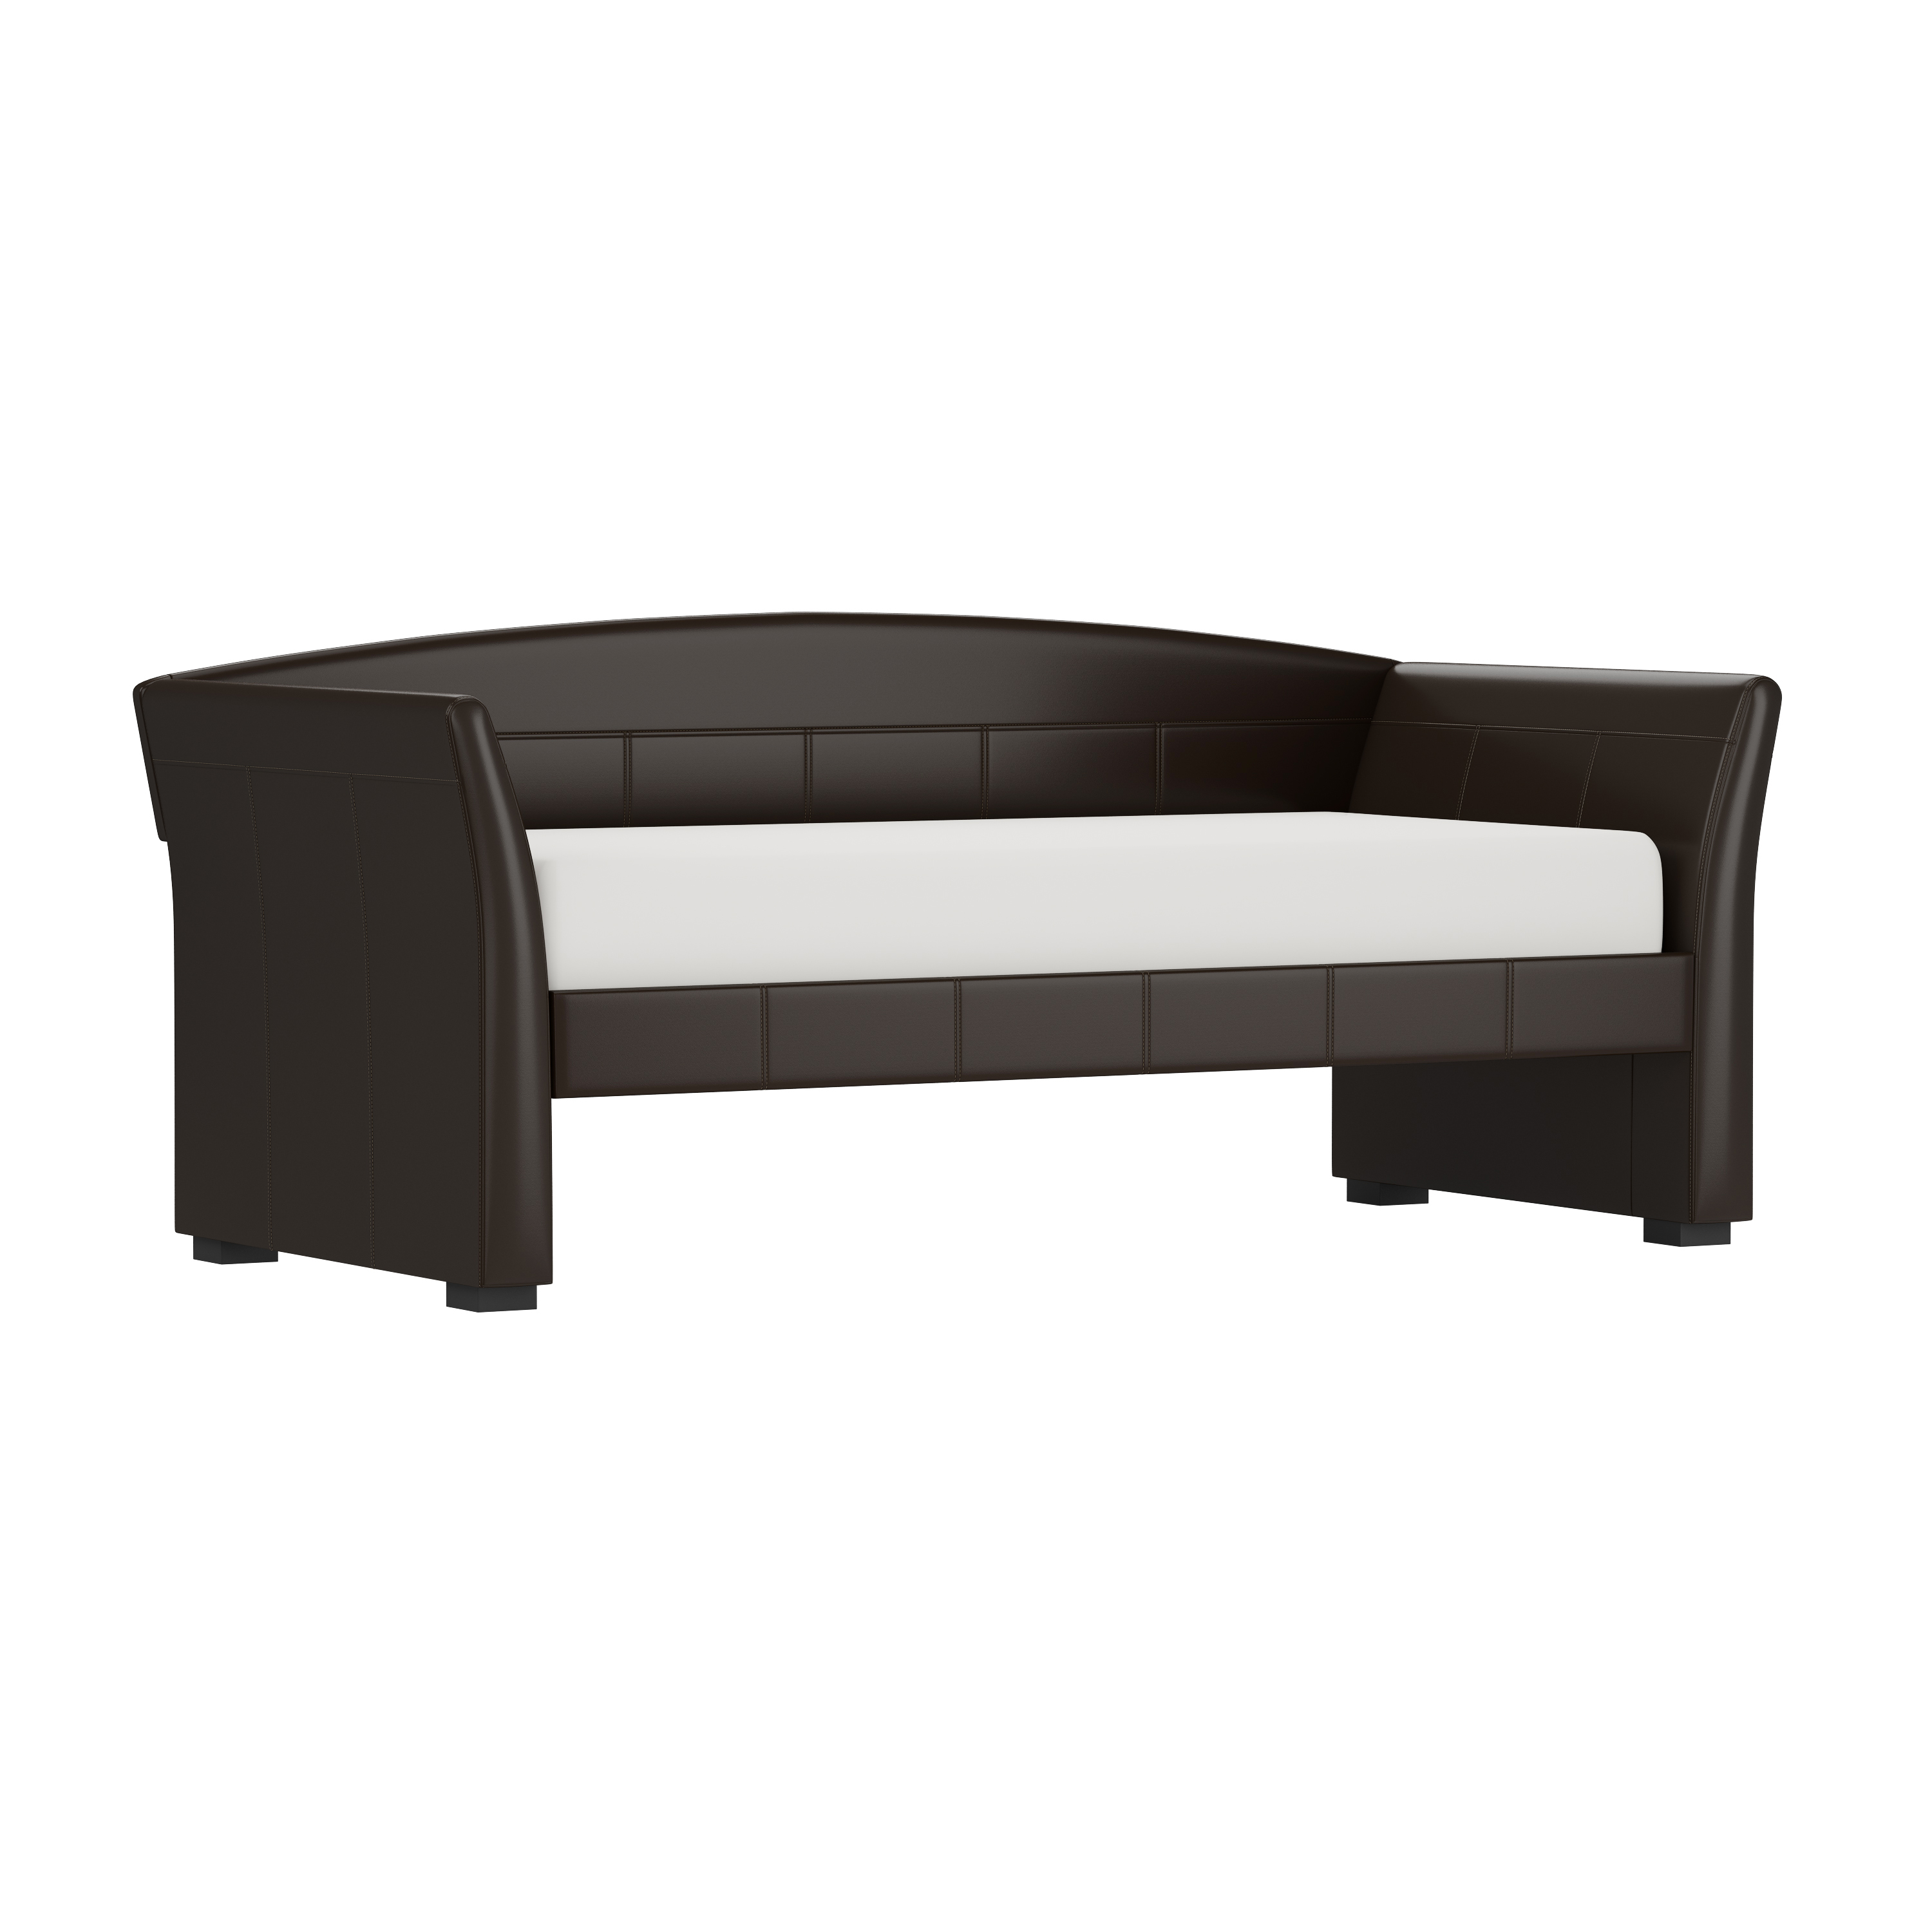 Montgomery Upholstered Daybed